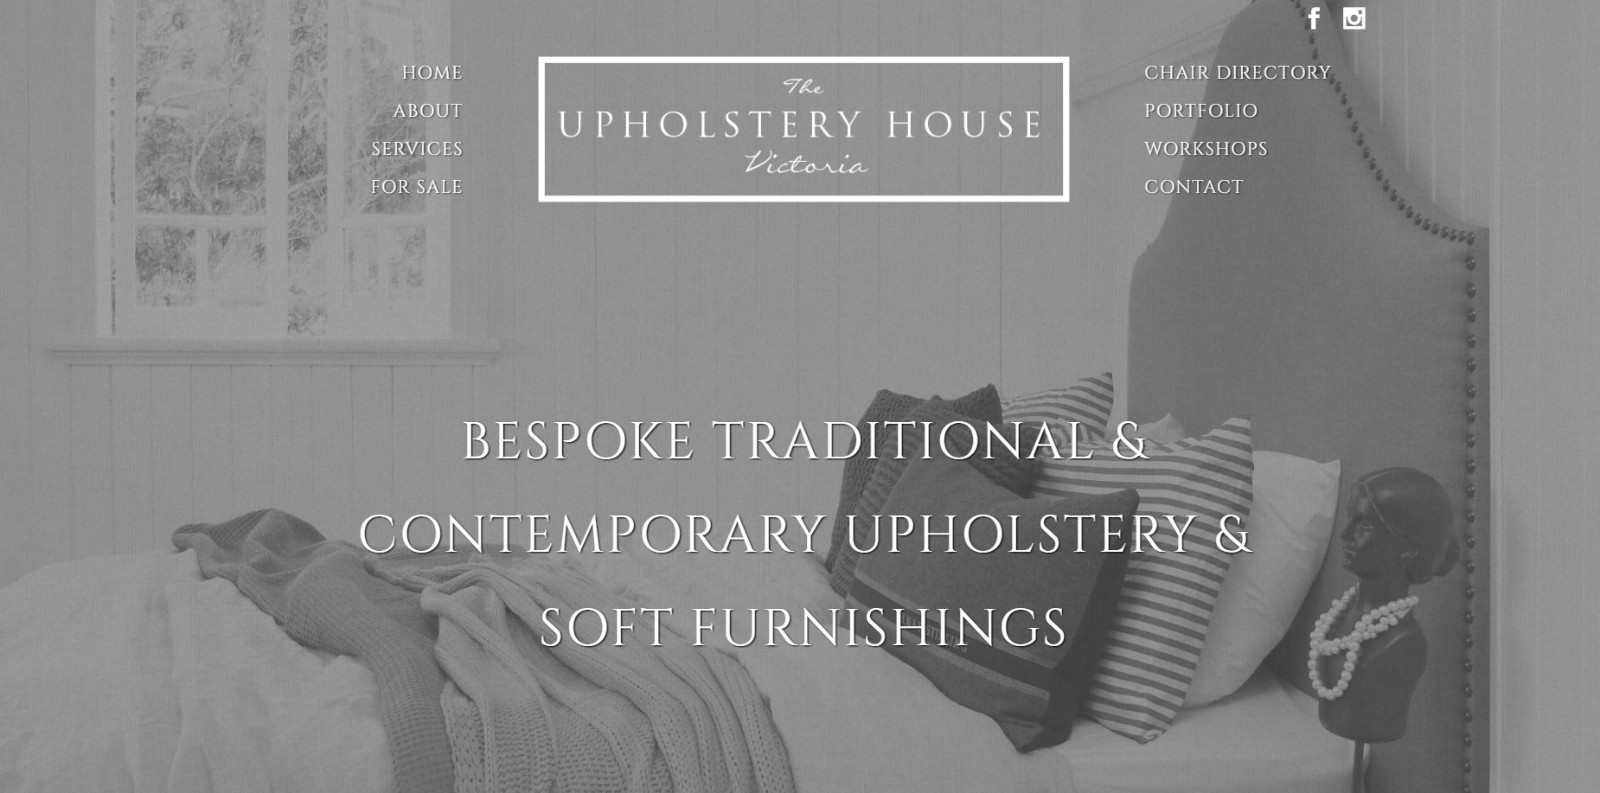 The Upholstery House